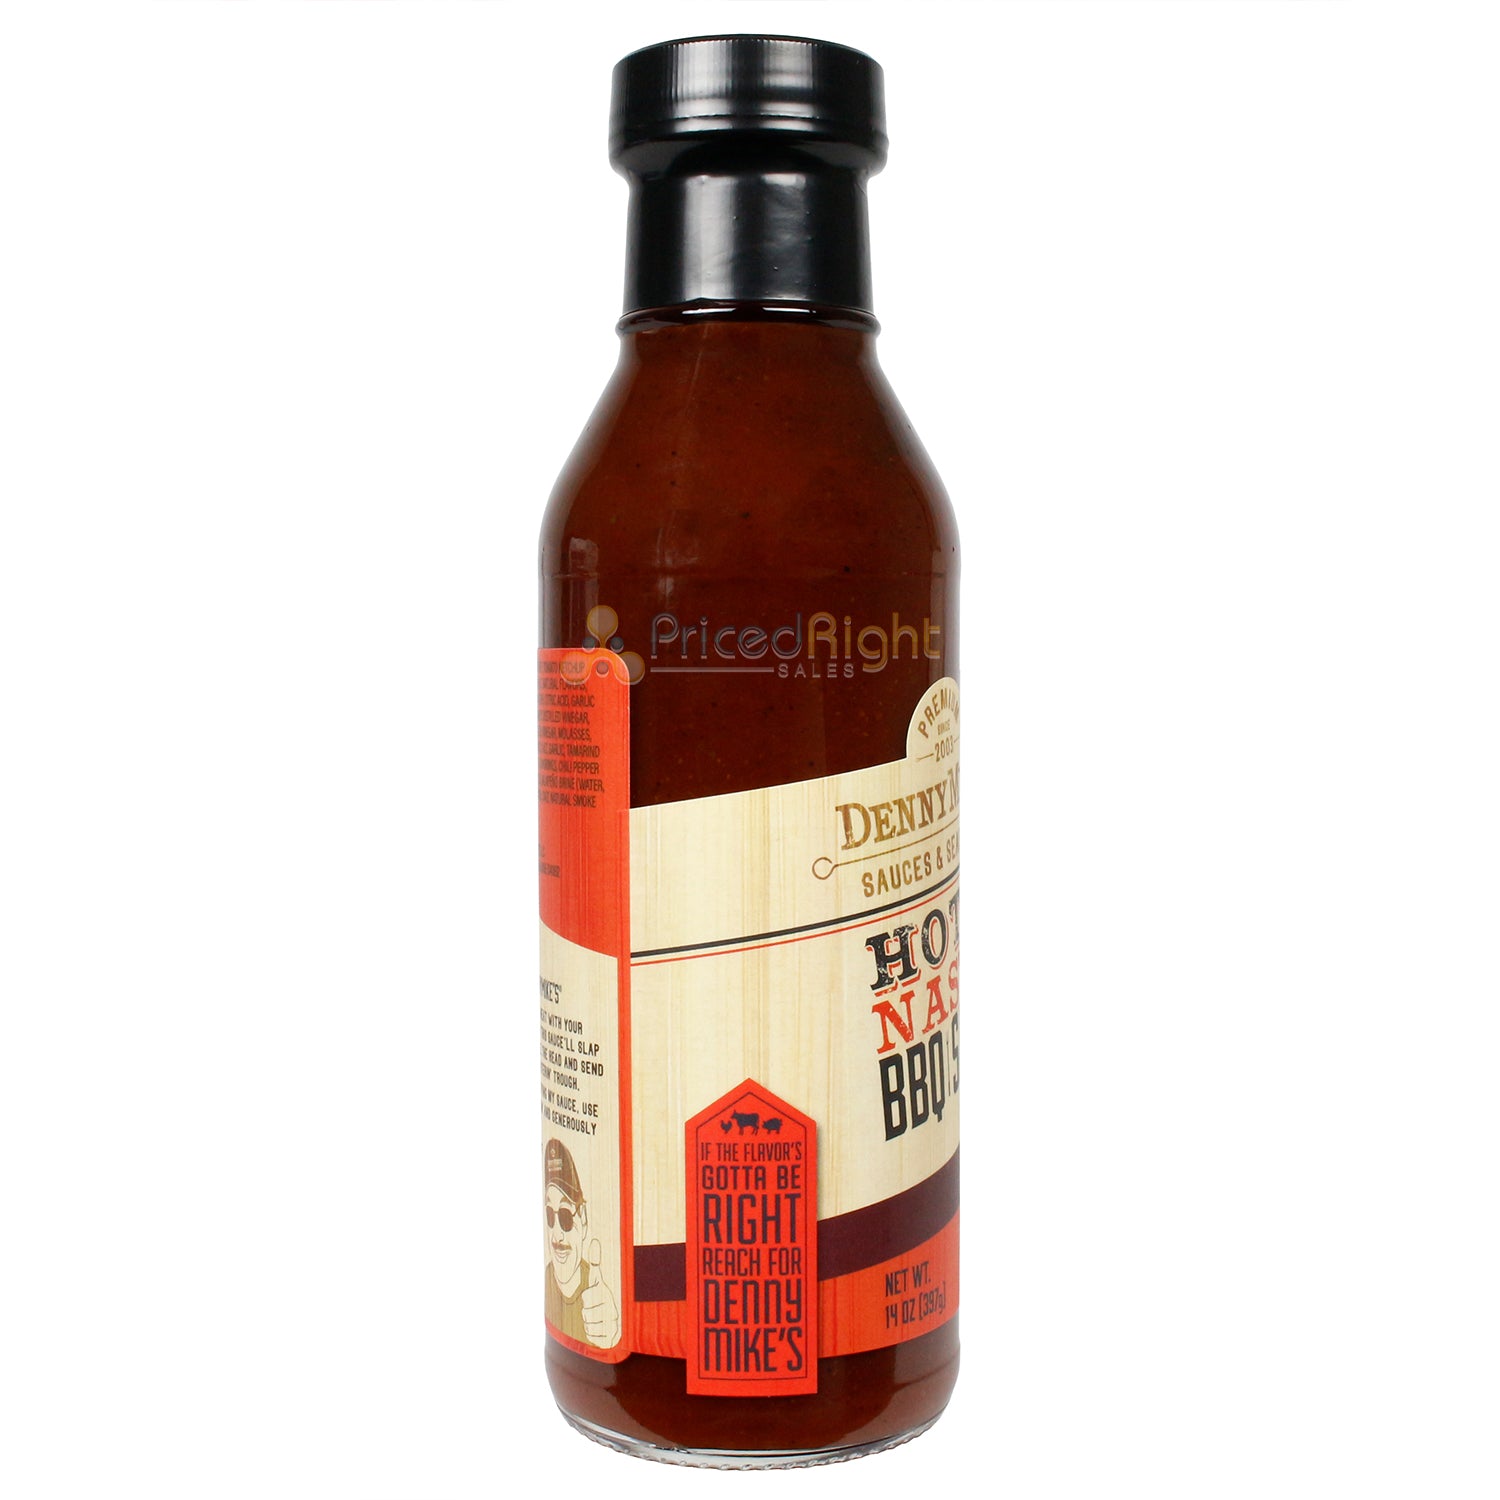 Denny Mike's Hot 'N Nasty BBQ Sauce Gluten Free Premium Ingredients 14 Ounce